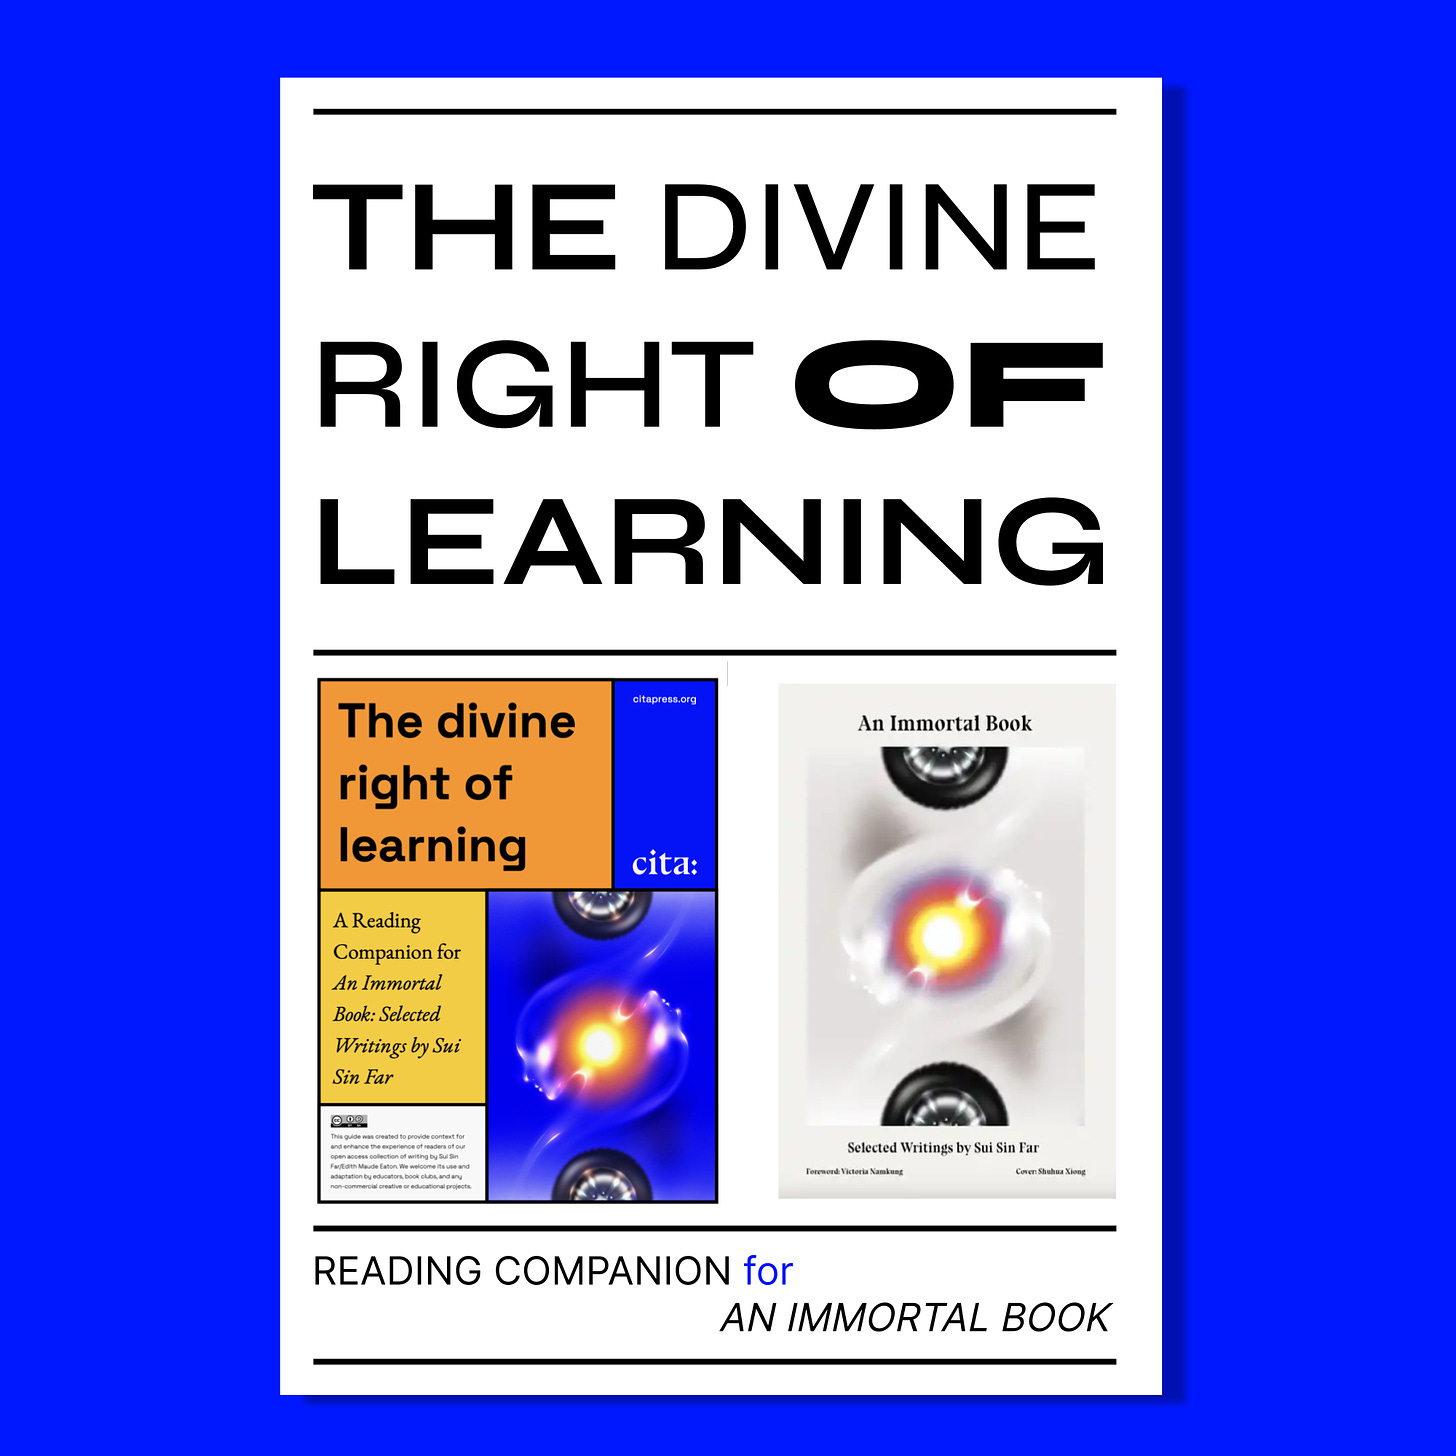 THE DIVINE RIGHT OF LEARNING. READING COMPANION for  AN IMMORTAL BOOK. Images: The book cover and the reading guide cover, both featuring an illustration of two silhouettes in profile circling a glowing orb and framed by tires. 